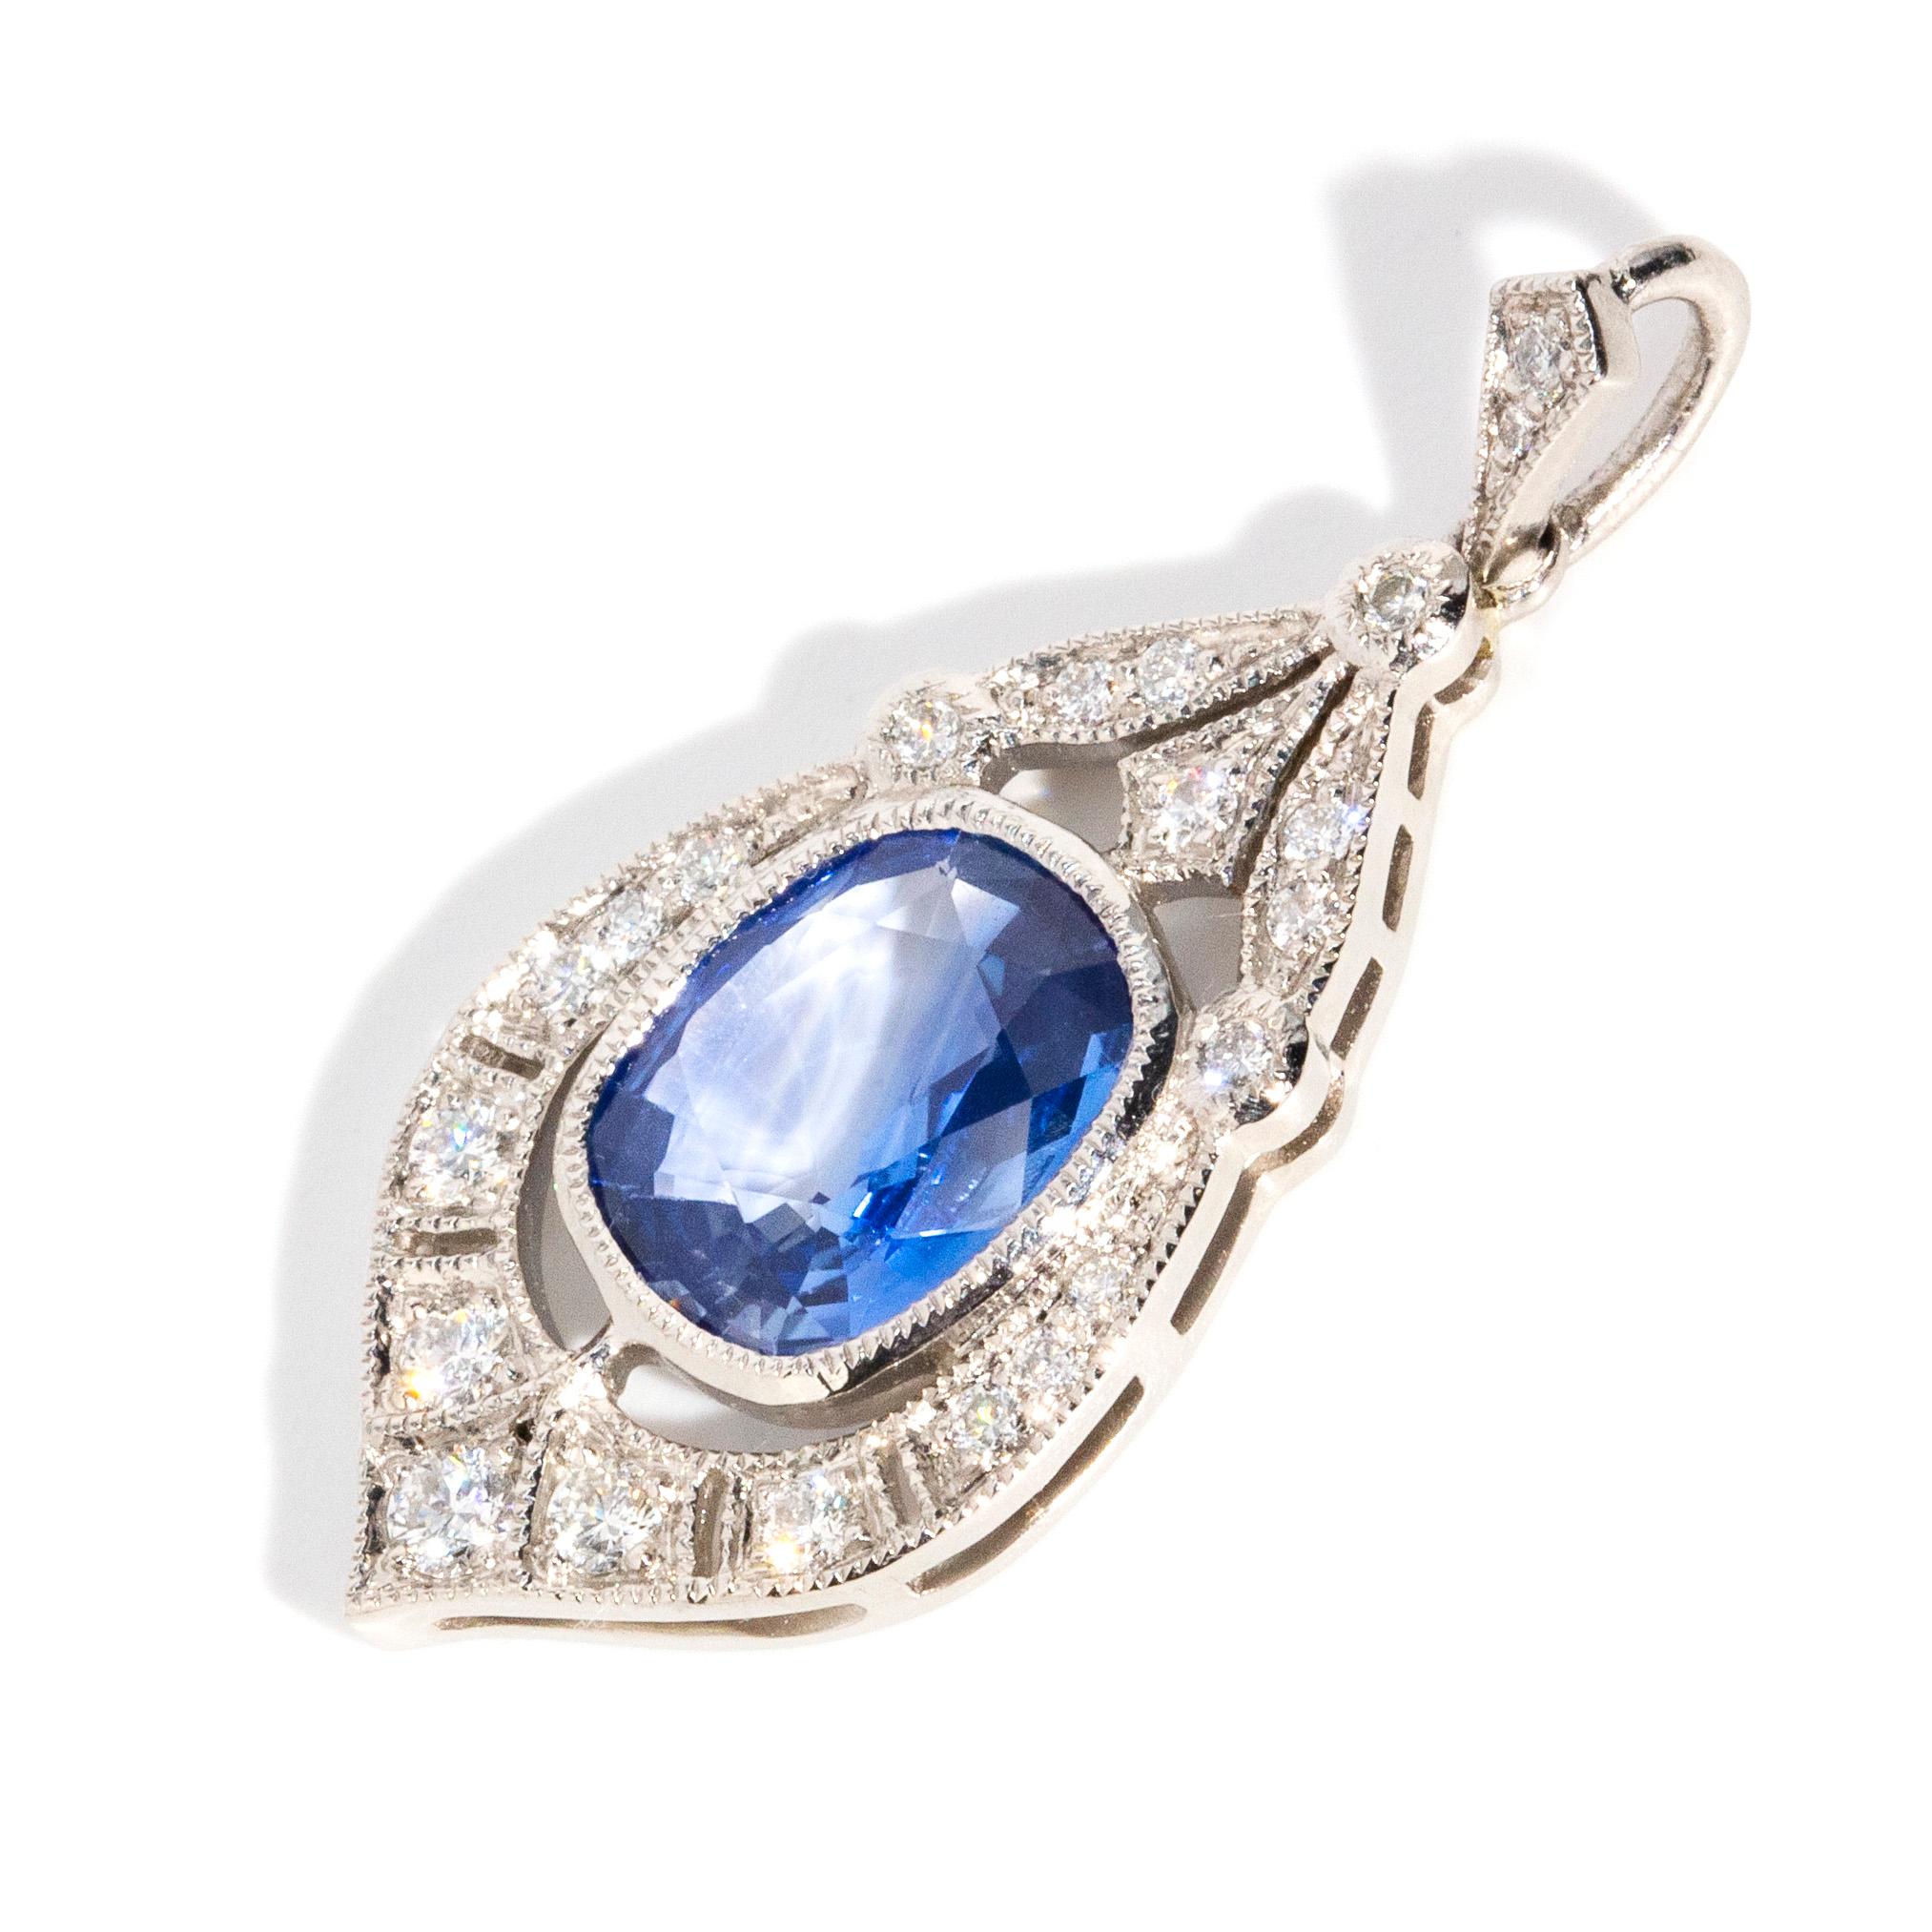 Crafted with devotion, this stunning art deco-inspired platinum milgrain pendant holds a stunning cushion-shaped Ceylon sapphire at the centre. A plethora of carefully set shimmering round brilliant cut diamonds decorate the gorgeous frame and bail,